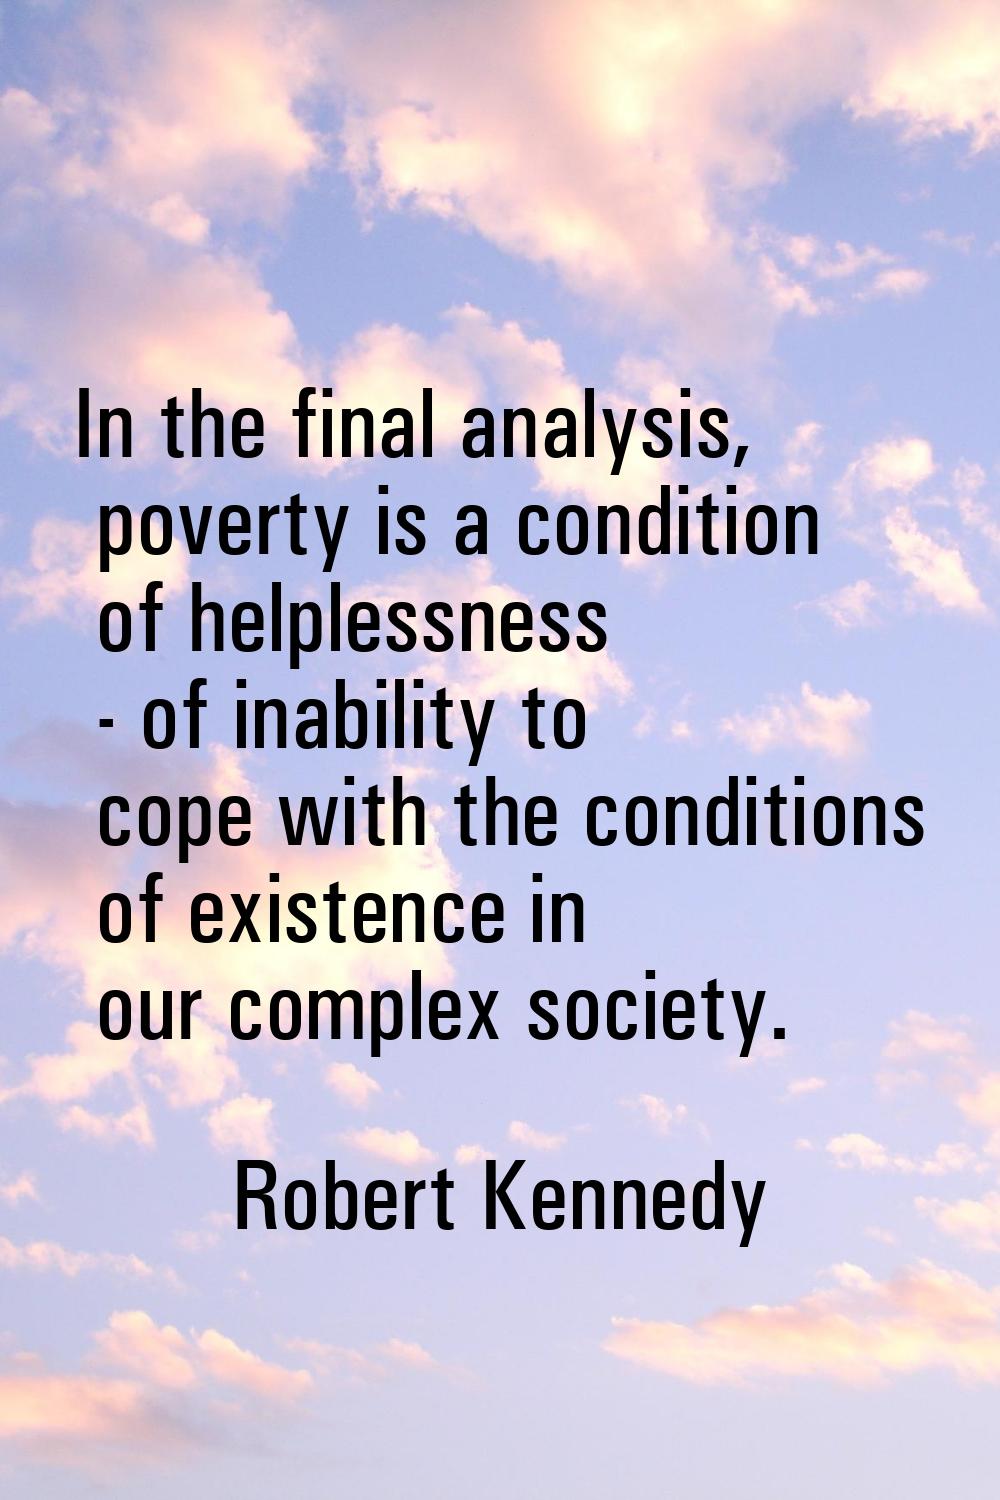 In the final analysis, poverty is a condition of helplessness - of inability to cope with the condi